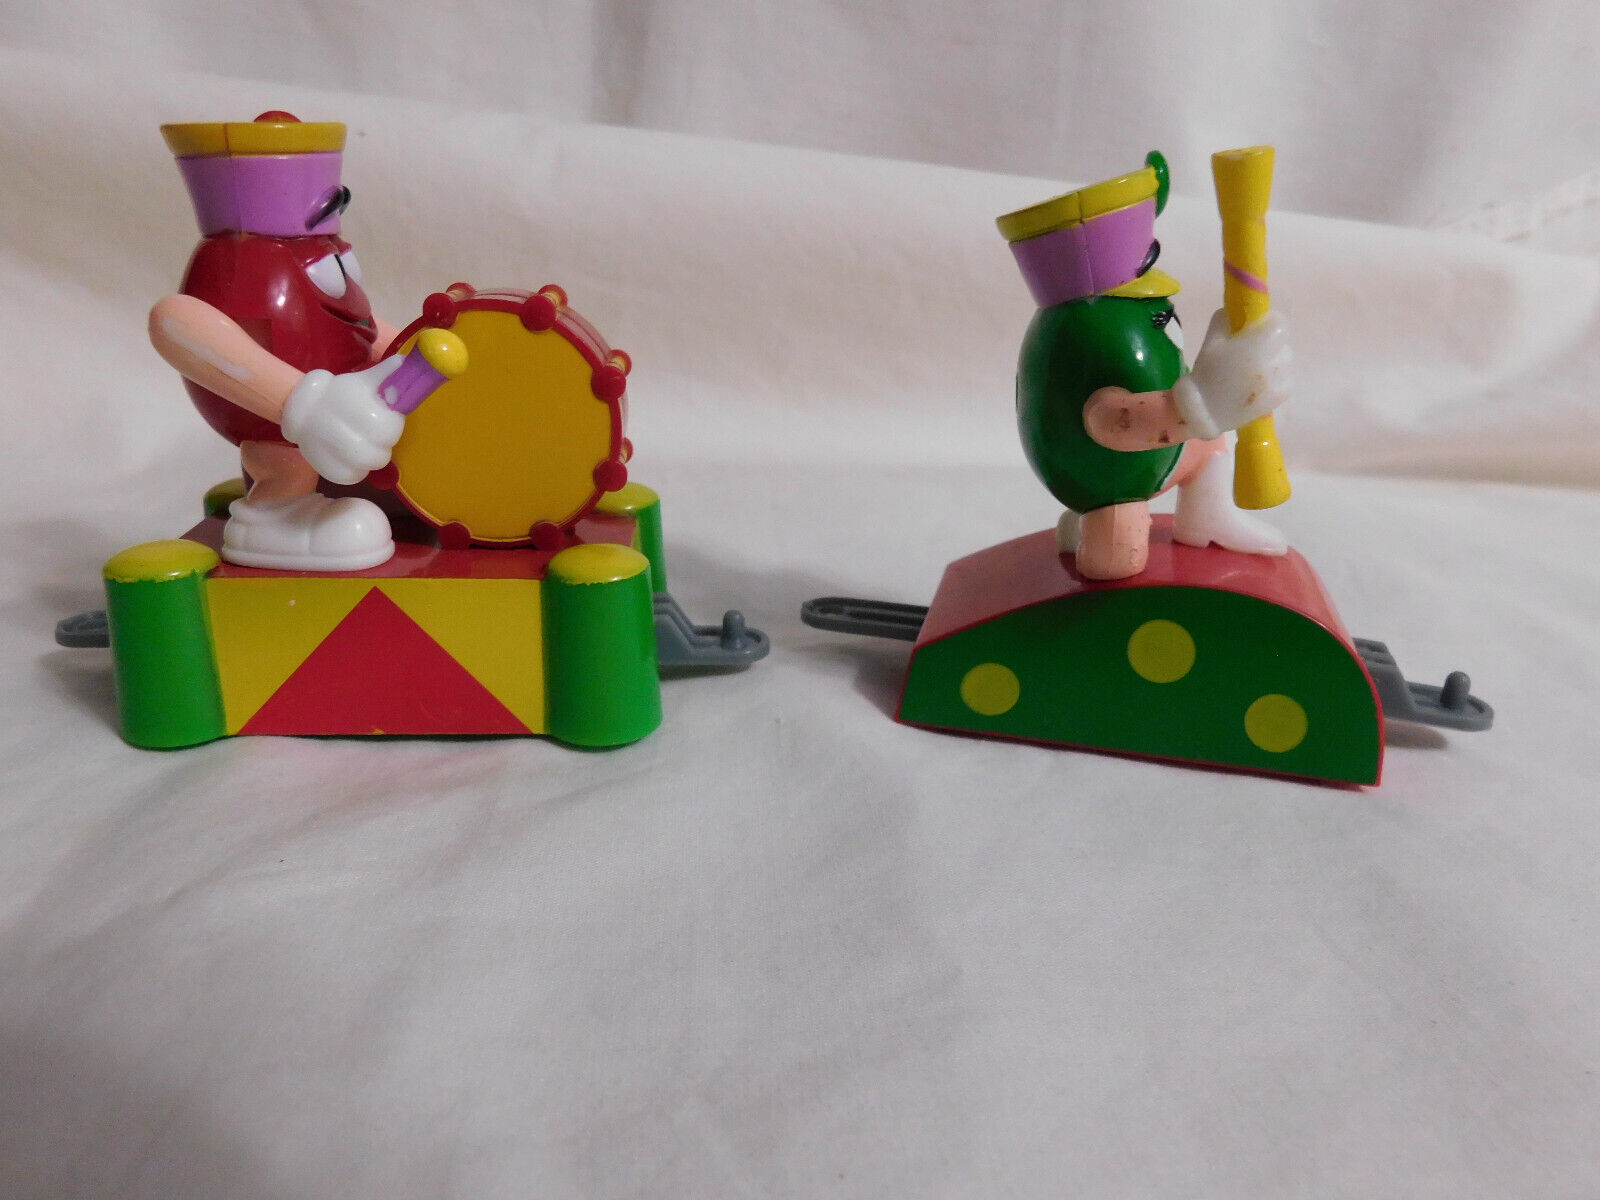 M Ms 2006 Christmas Train Cars Circus lot of 2 2 1/2  Inches Tall - $6.99